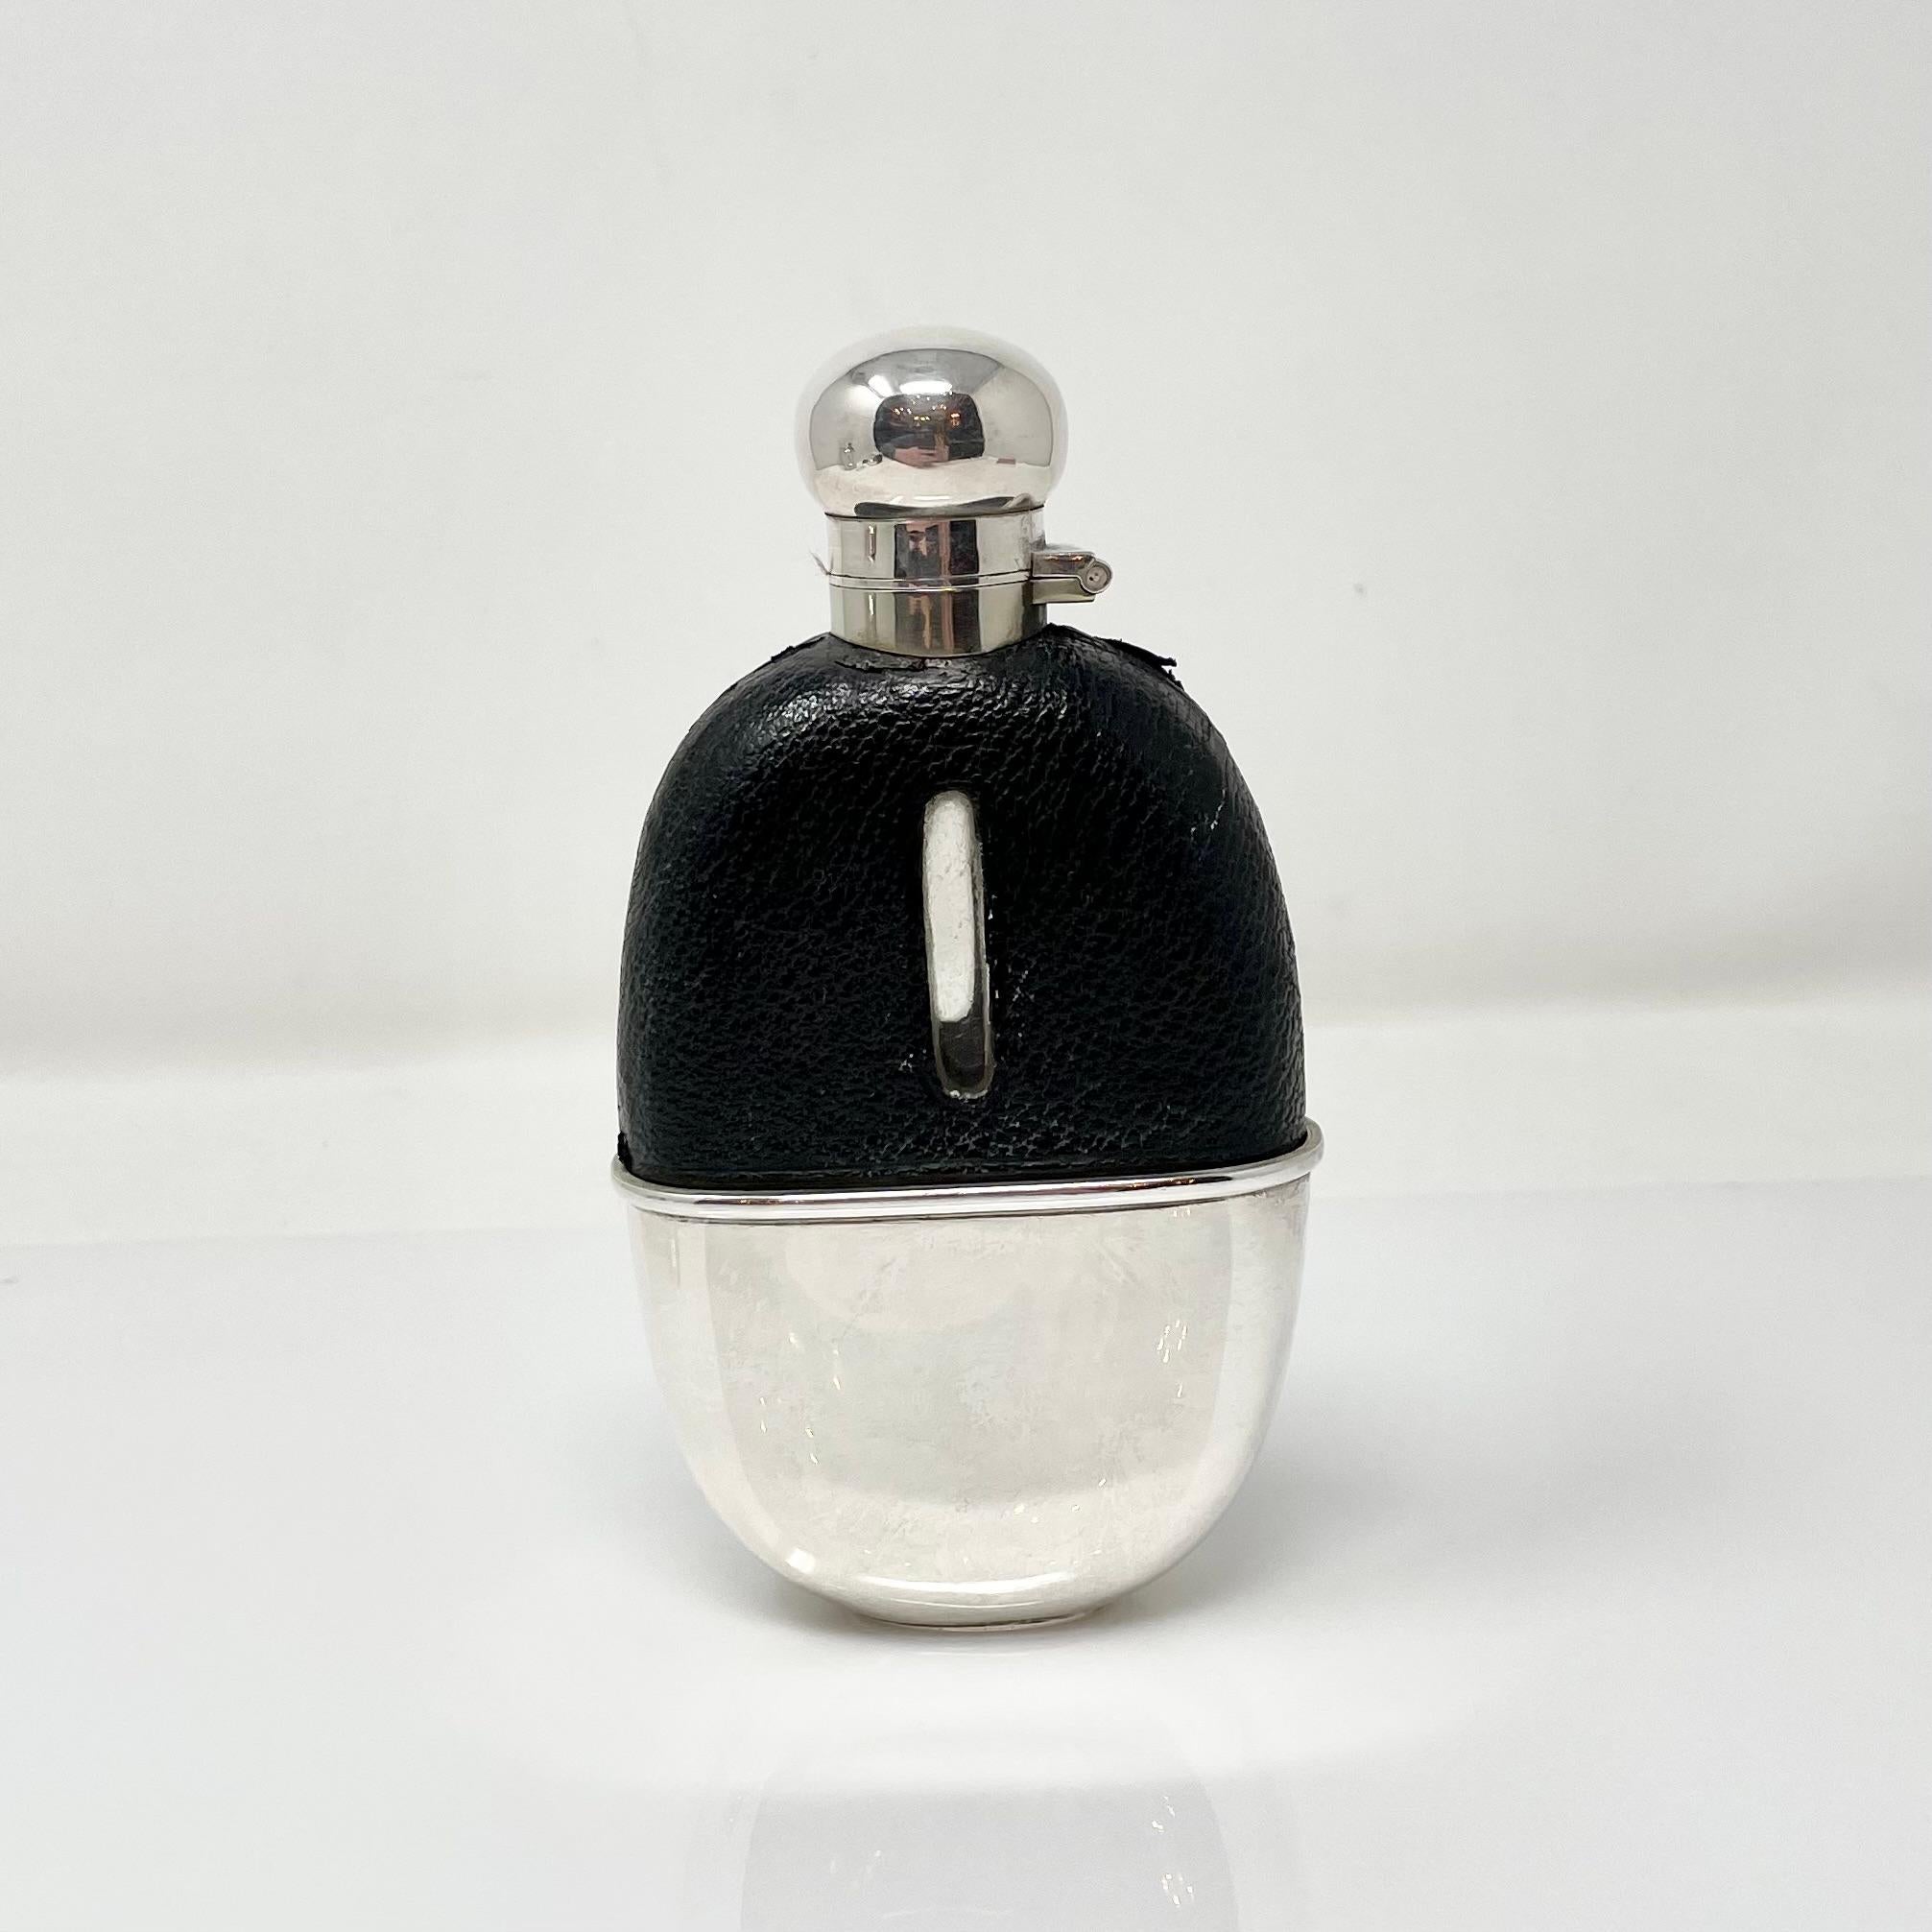 Antique English Sheffield glass and silver-plated hip flask mounted with leather and removeable cup, circa 1880.